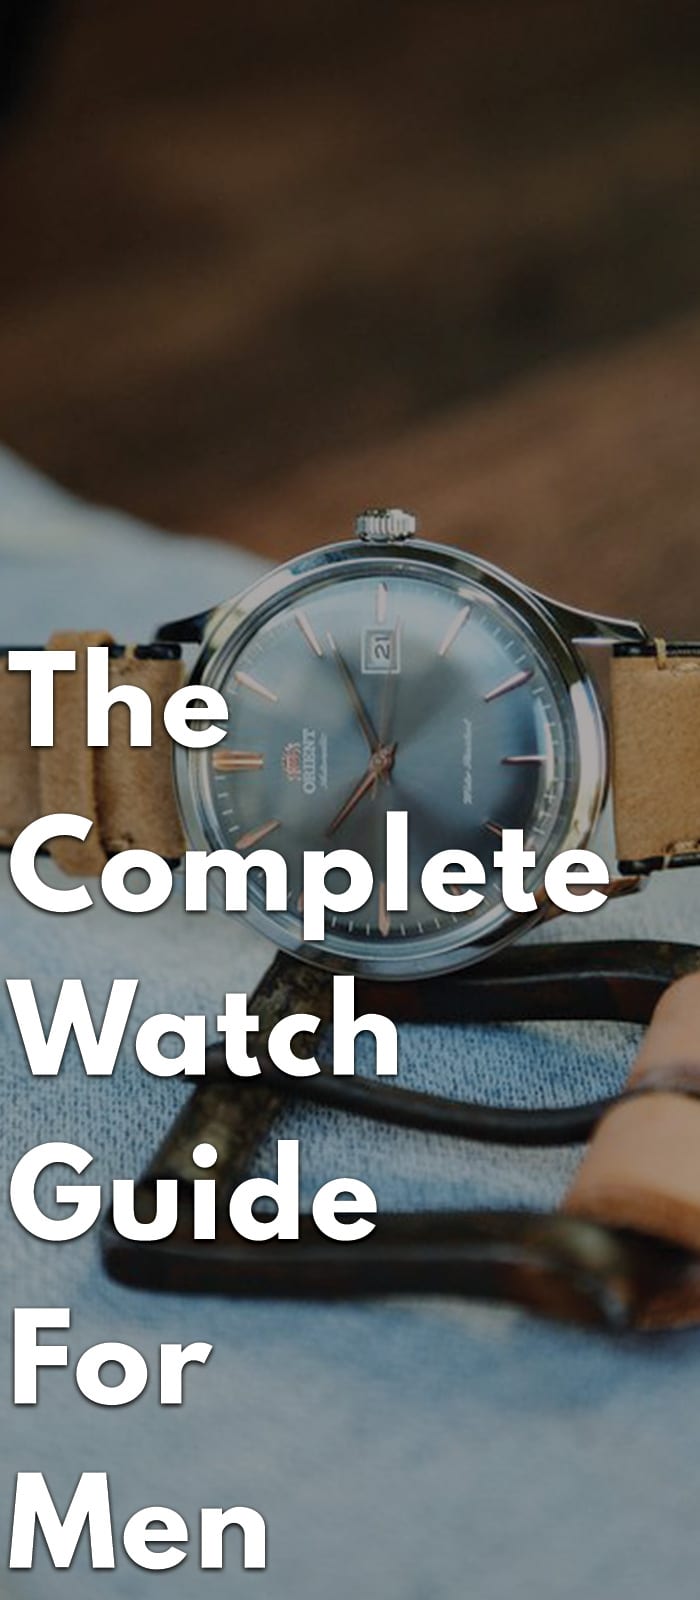 Complete Watch Guide